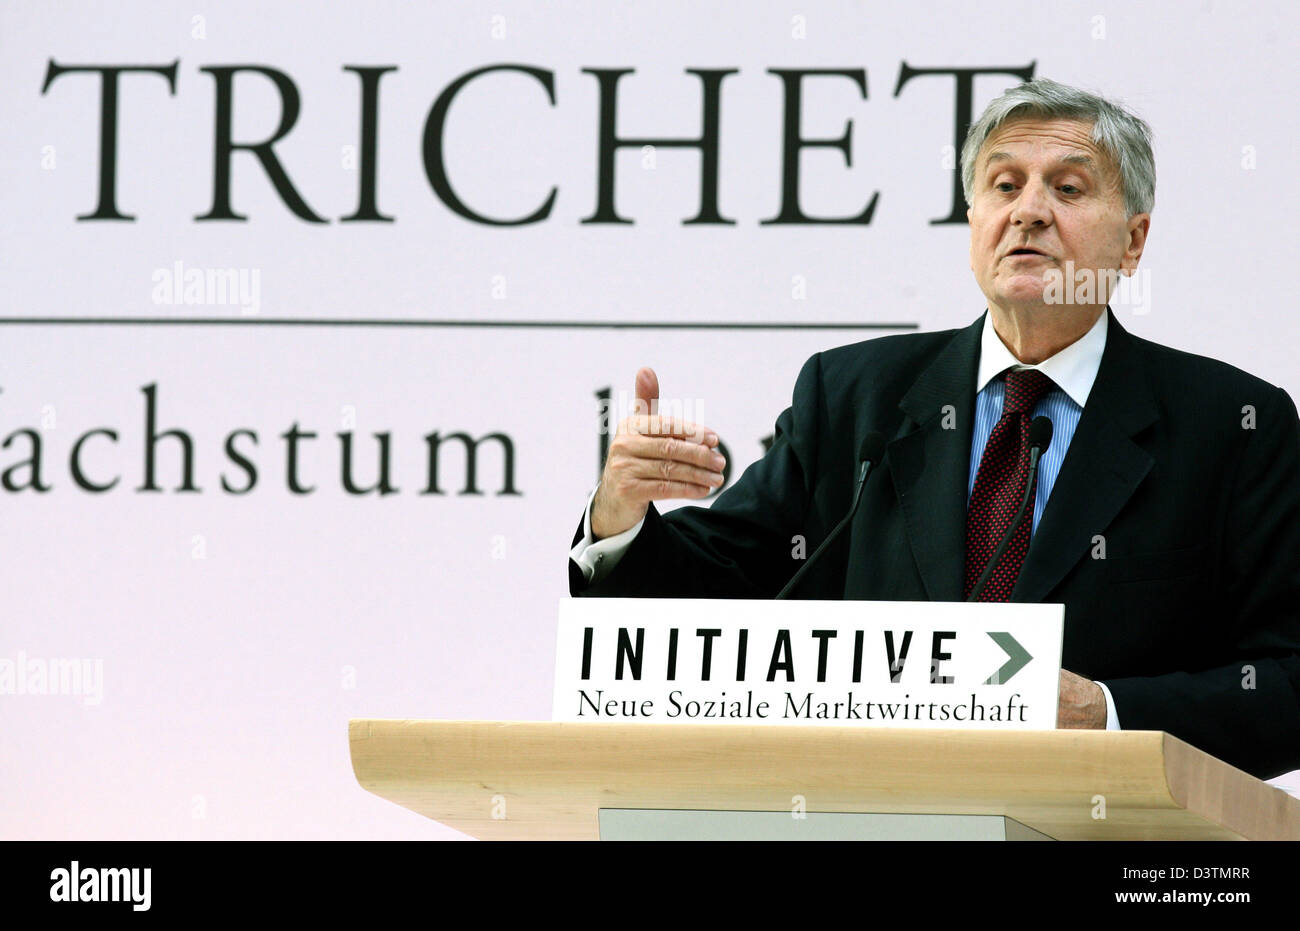 The President of the European Central Bank, Jean-Claude Trichet, speaks at an event of the 'Initiative neue soziale Marktwirtschaft' (lit: 'Initiative For A New Social Market Economy') of the Ludwig-Erhard-Lecture: 'Wie Europa zu mehr Wachstum kommt' (lit.: 'How Europe Can Gain in Economic Growth') in Berlin, Monday, 16 October 2006. Photo: Marcel Mettelsiefen Stock Photo